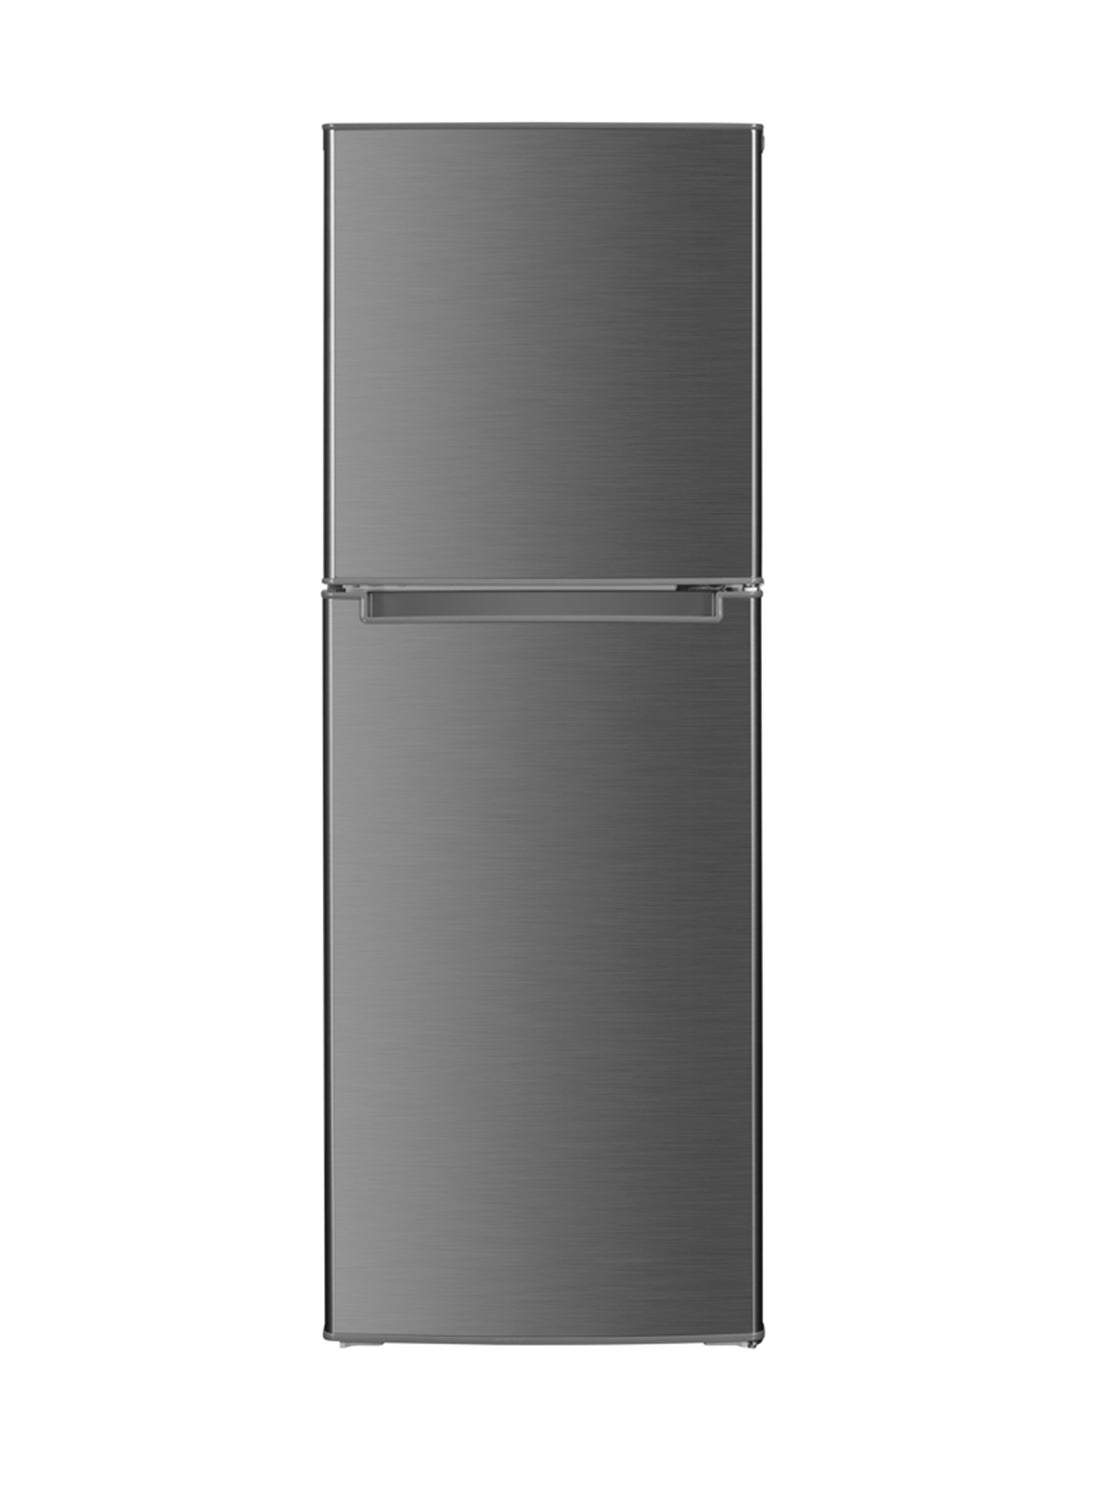 Double Door Defrost Top Mount With Glass Shelf, 240 litres Gross Capacity Refrigerator ARF240DN5S / ARF240DS5 Silver 